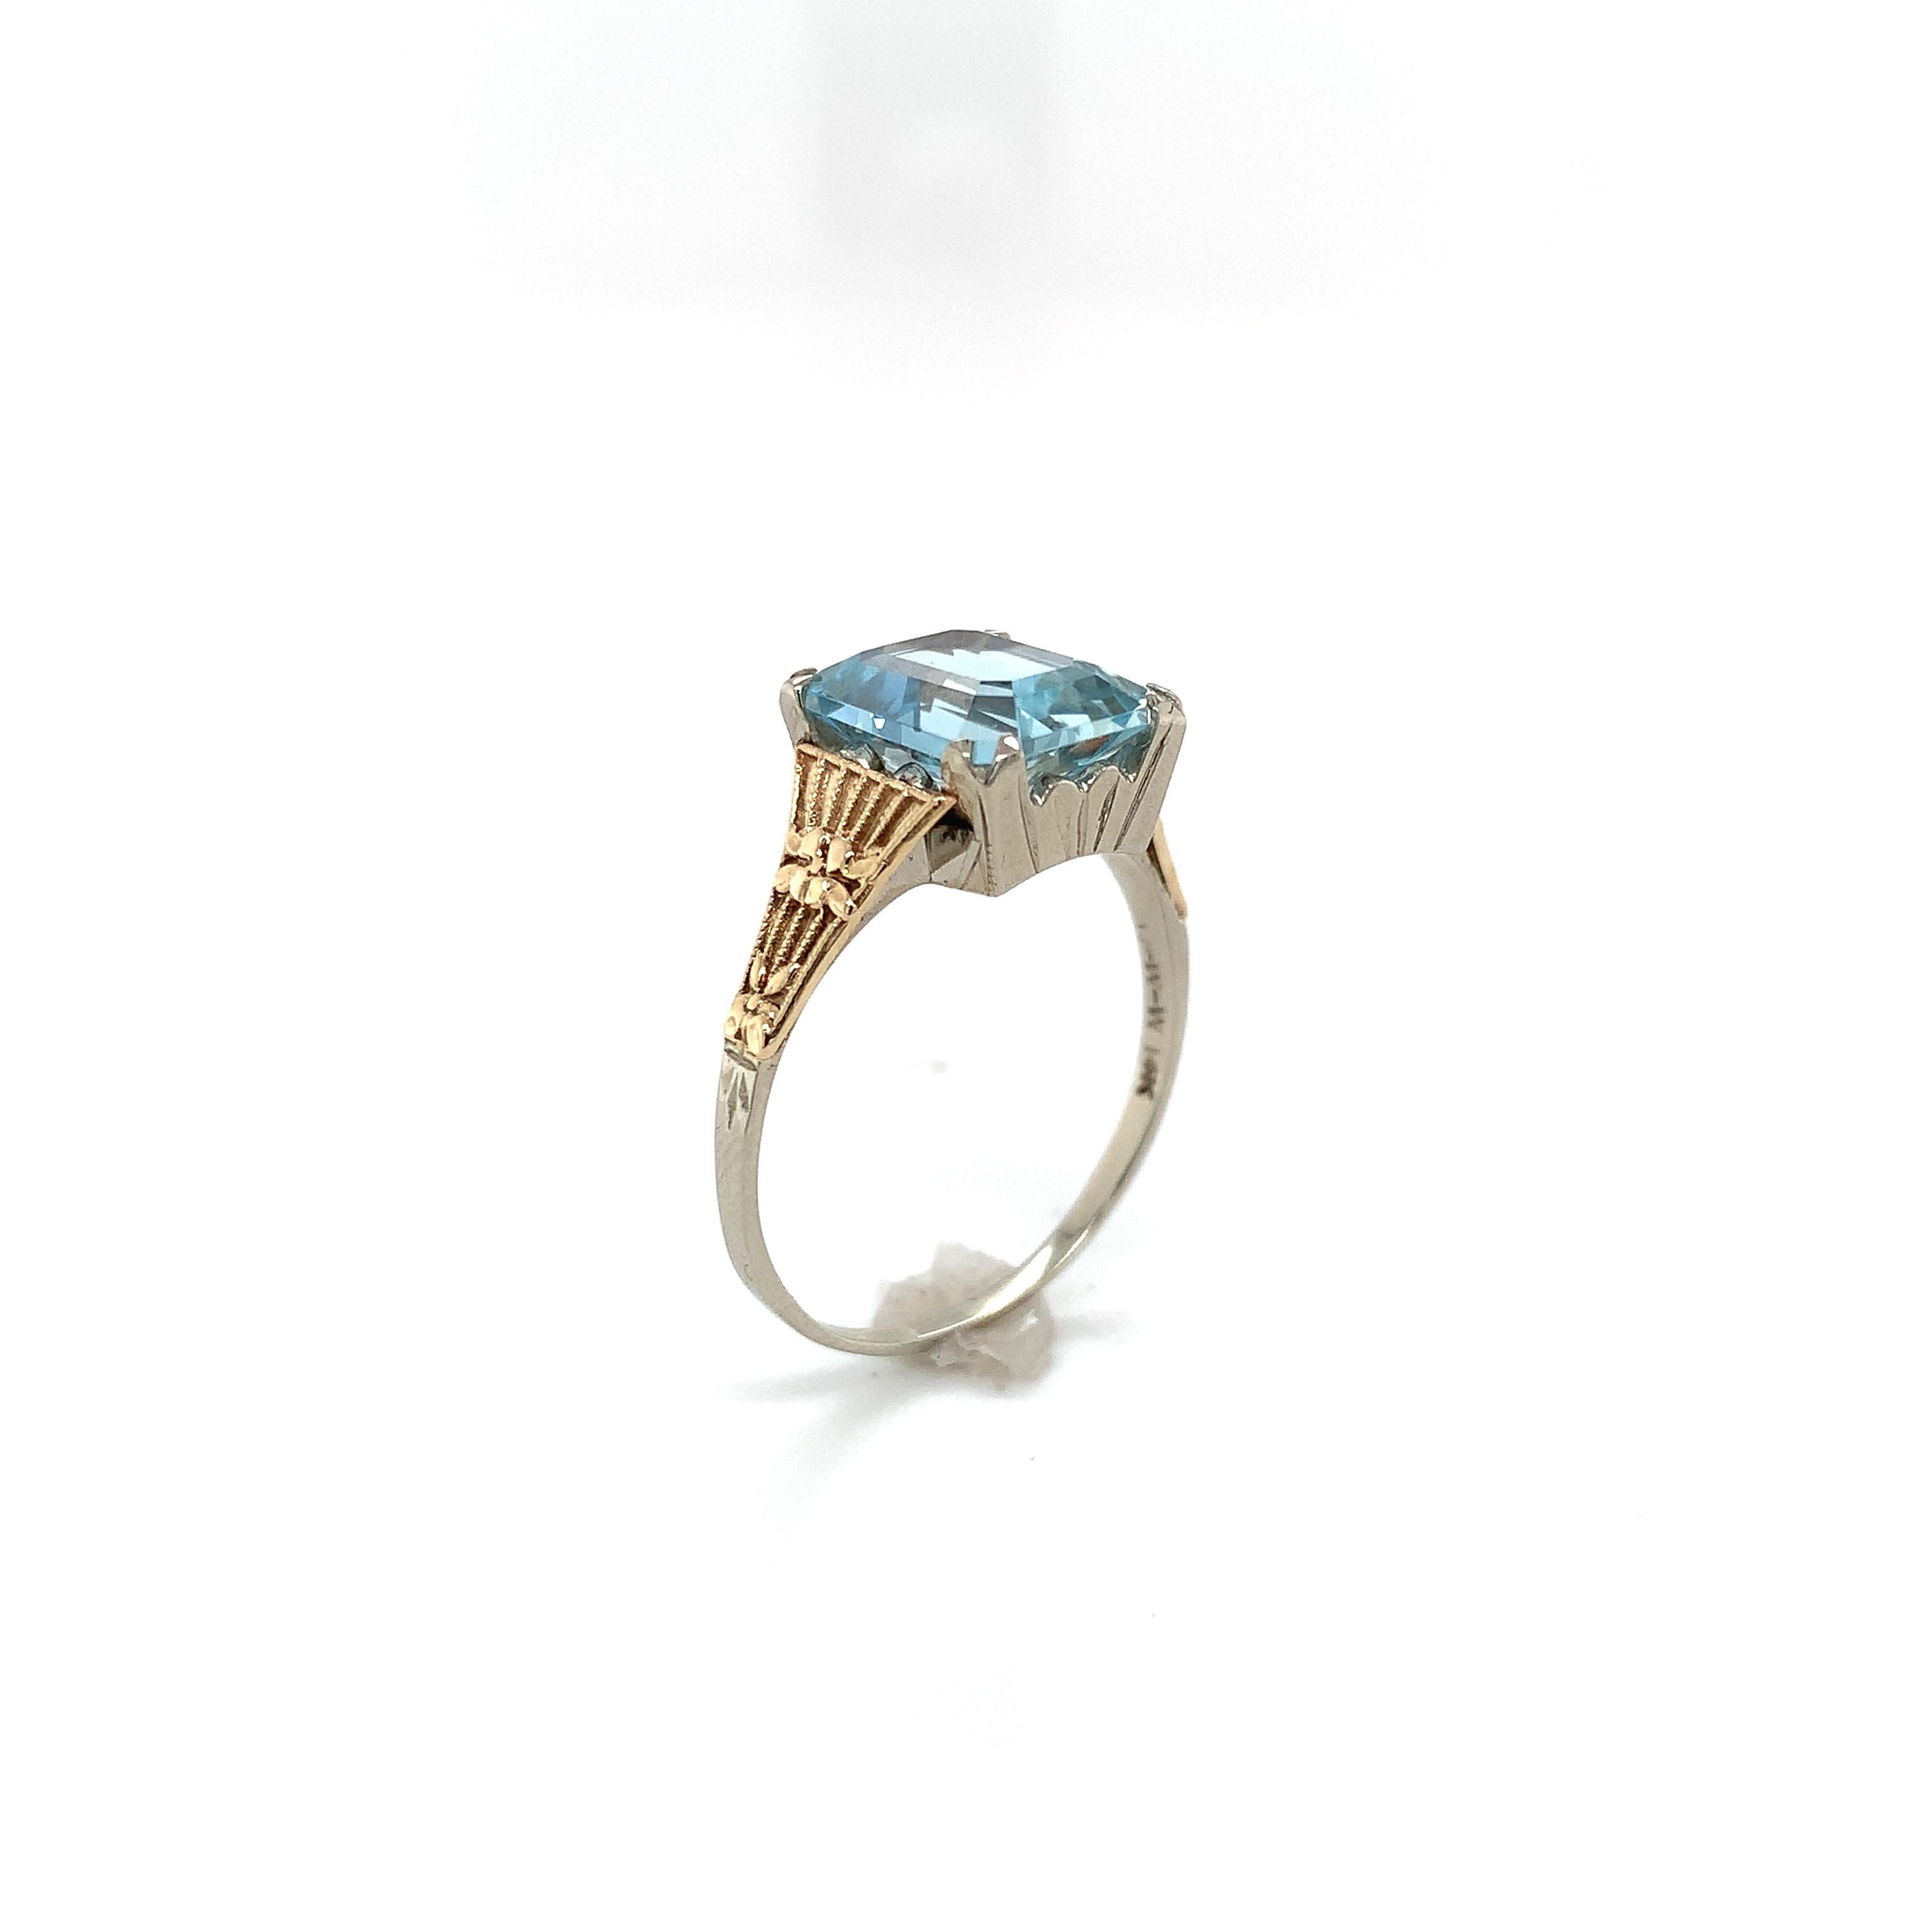 Filigree 14K Gold 3.25 carat Aquamarine Ring In Good Condition For Sale In Big Bend, WI